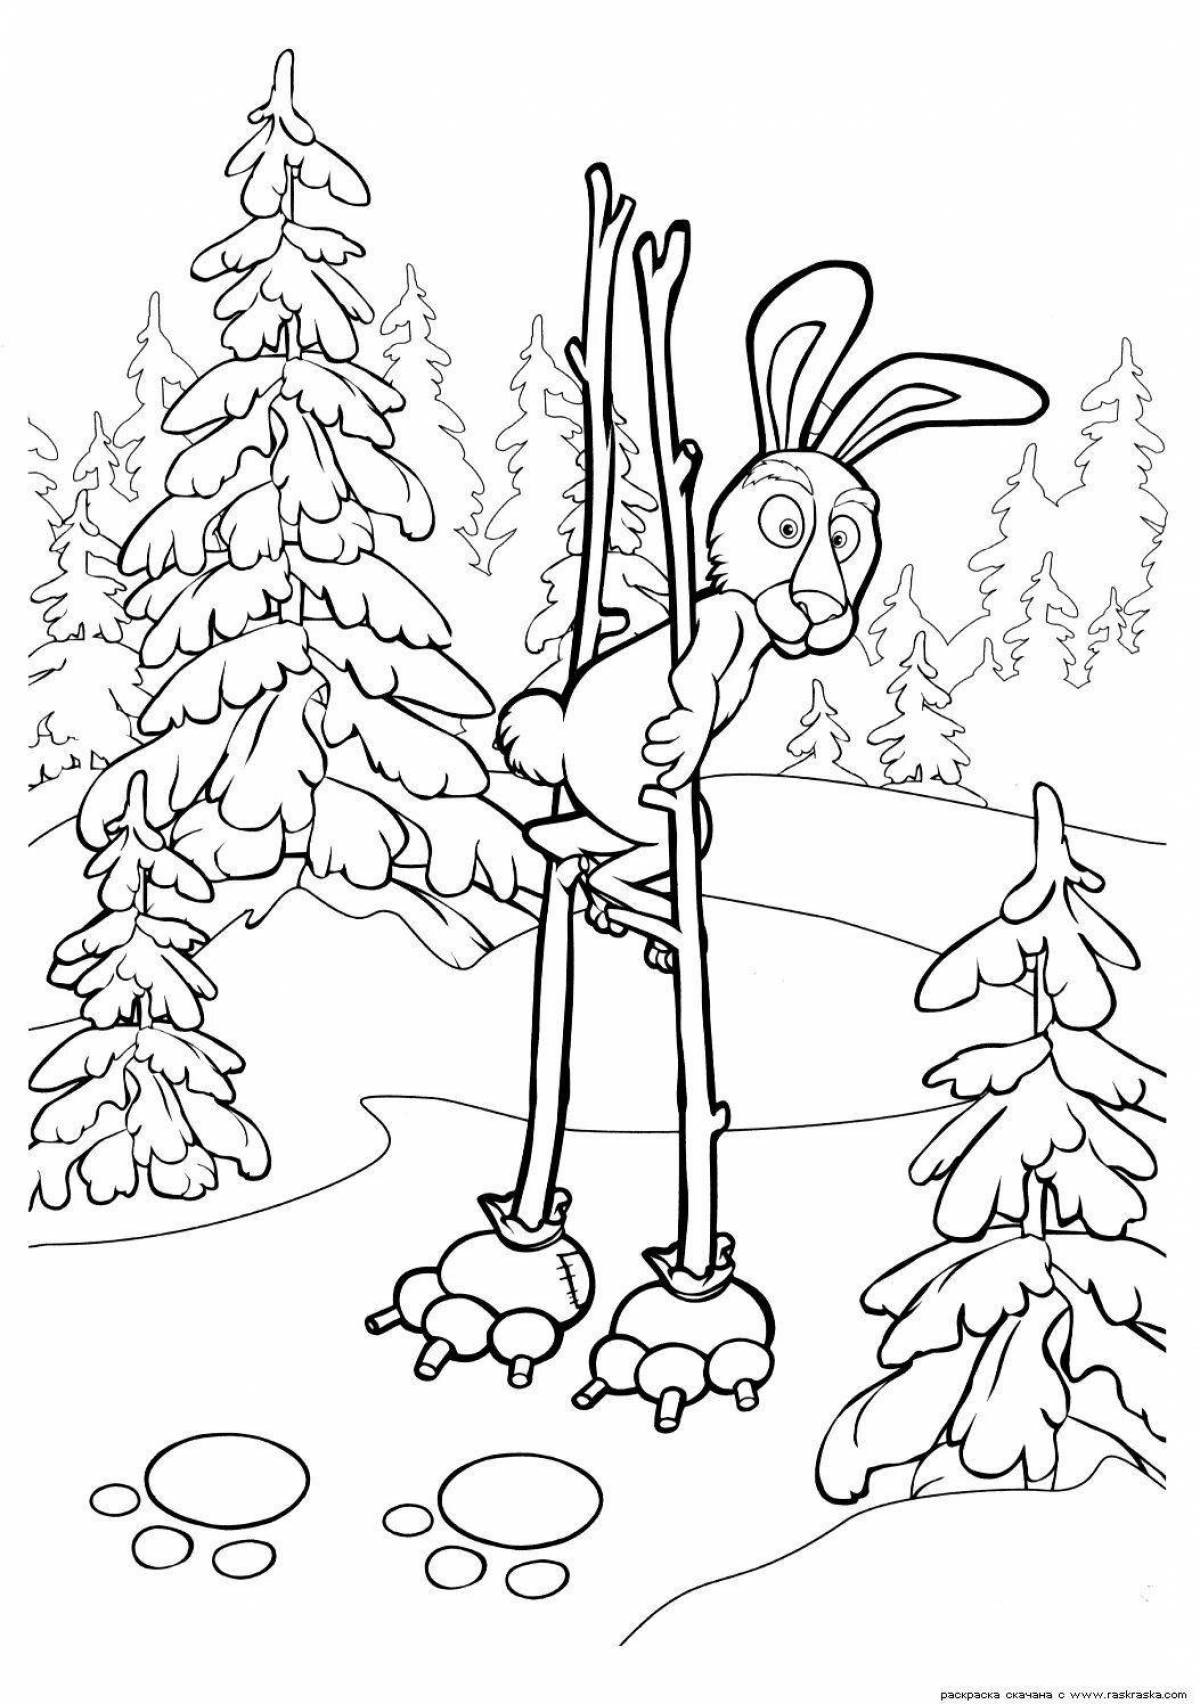 Witty coloring hare from masha and bear